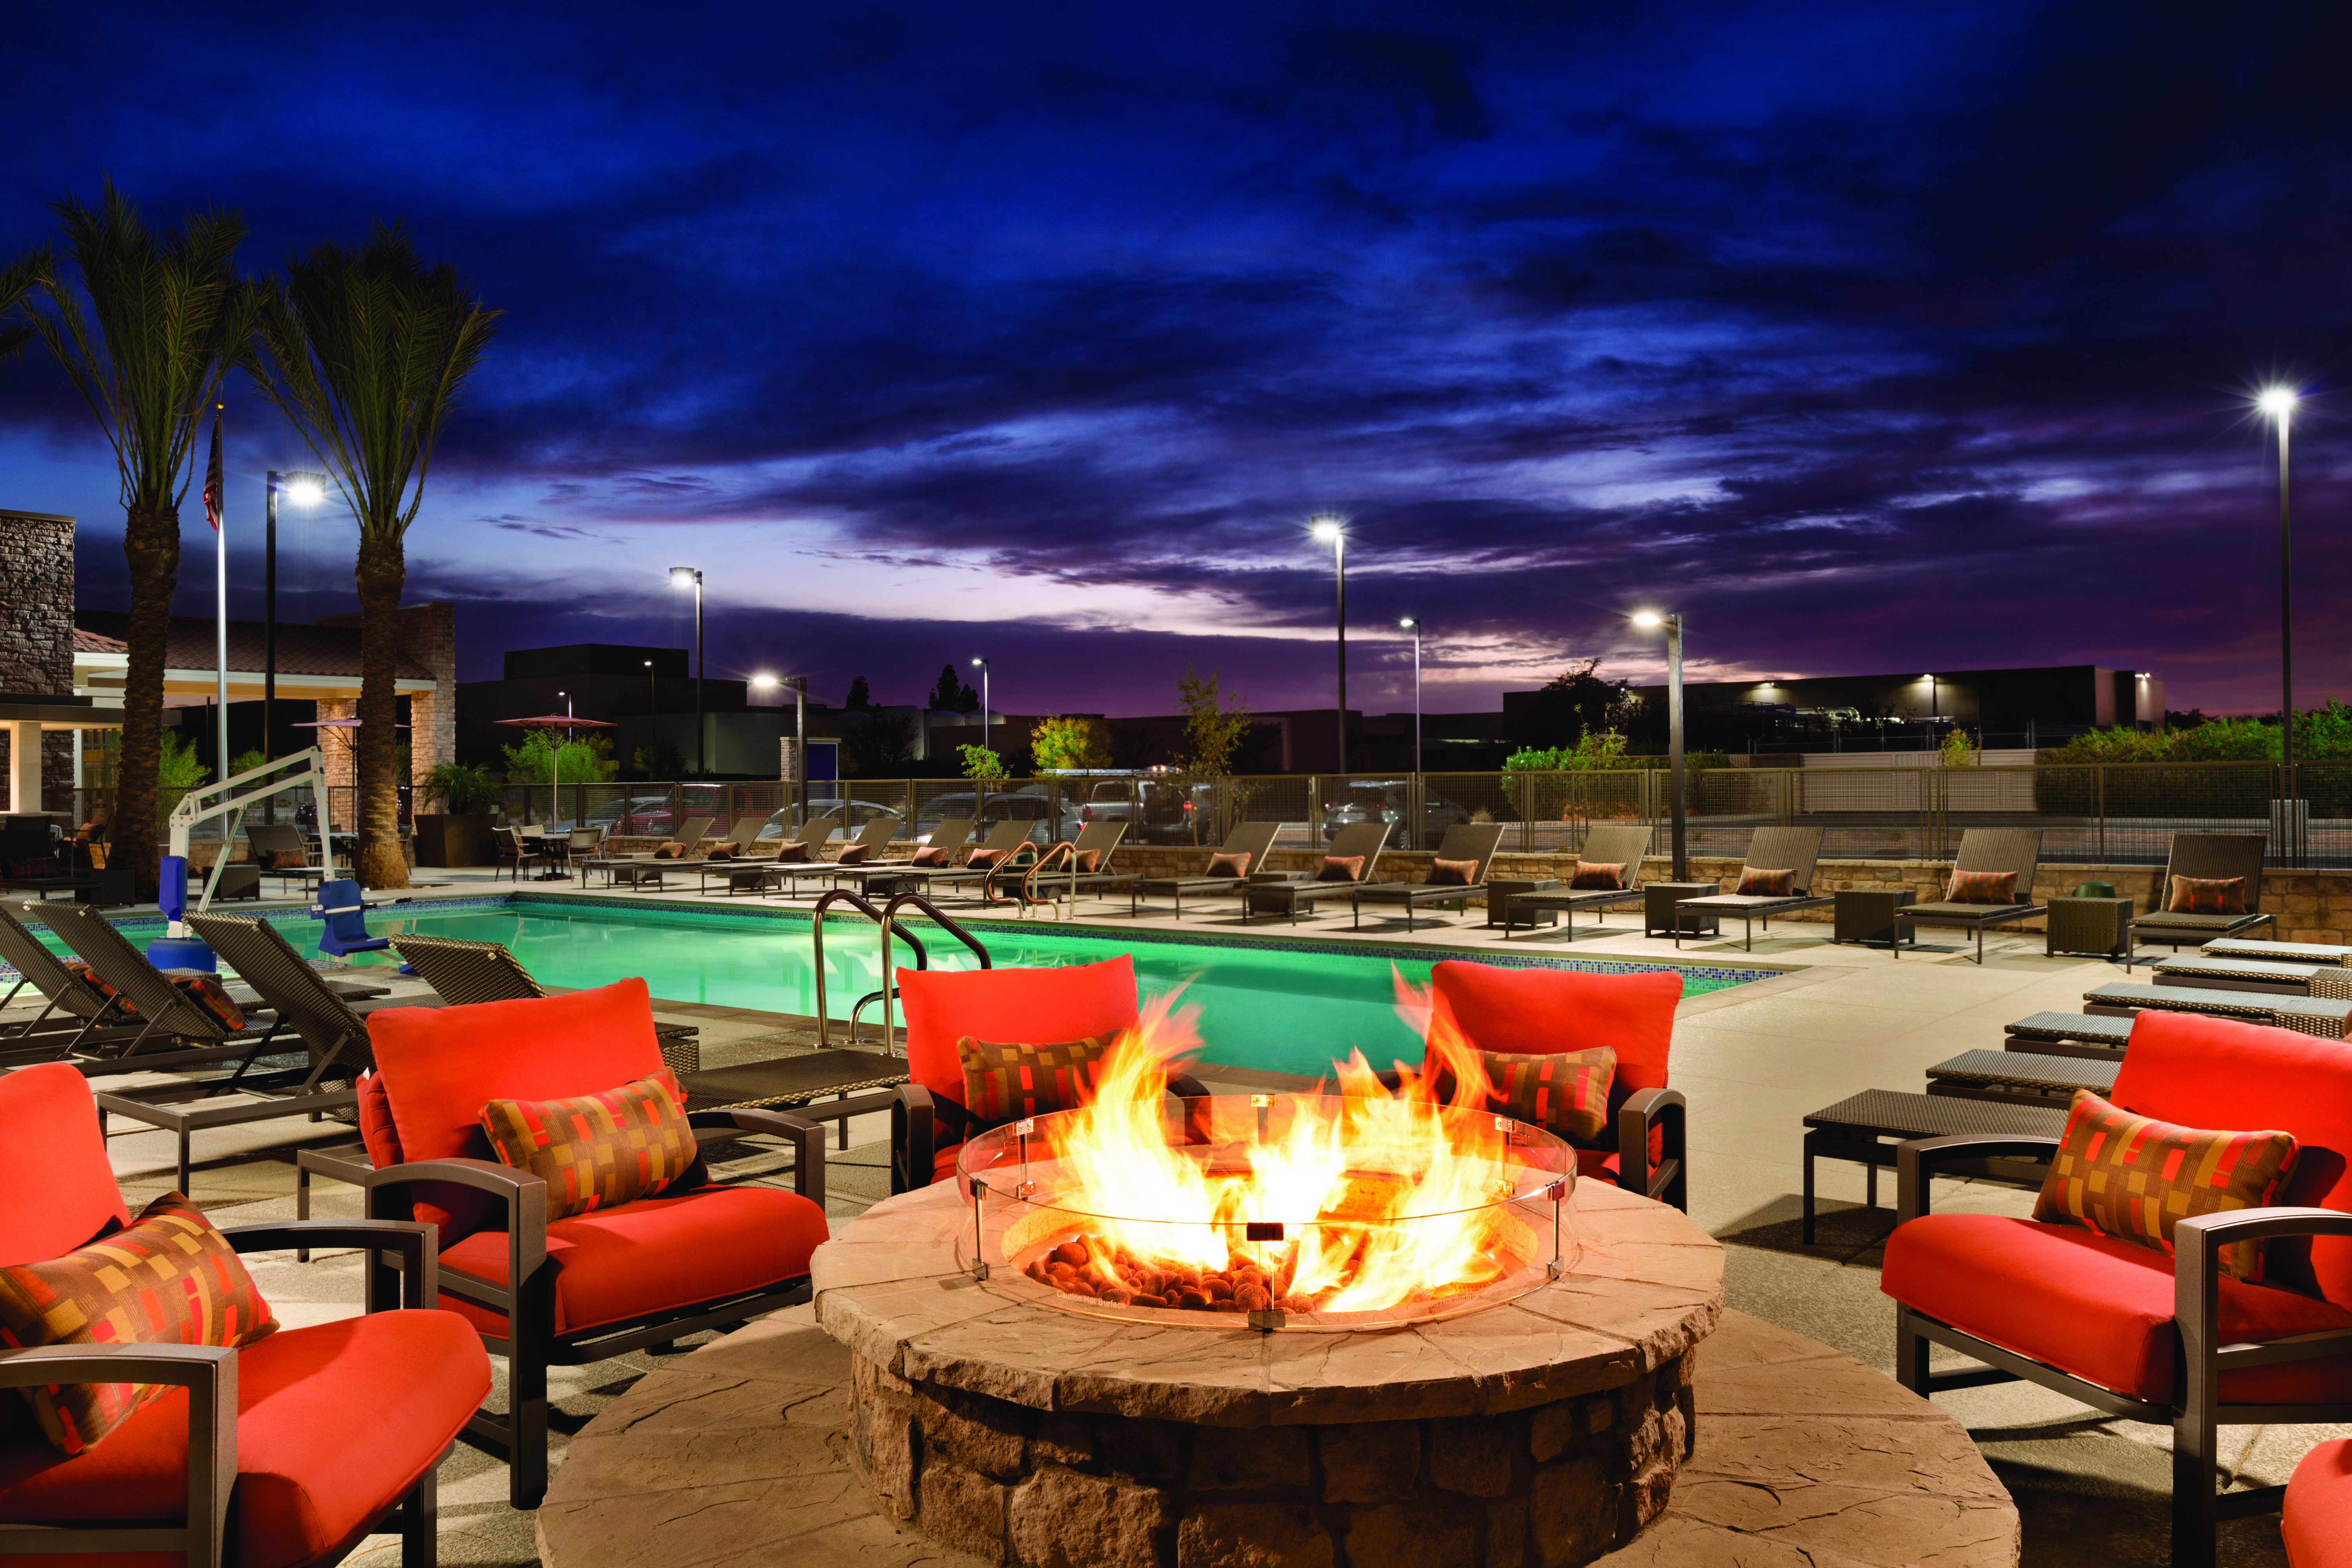 Outdoor Patio Seating Area with Firepit, Armchairs and Outdoor Pool at Dusk